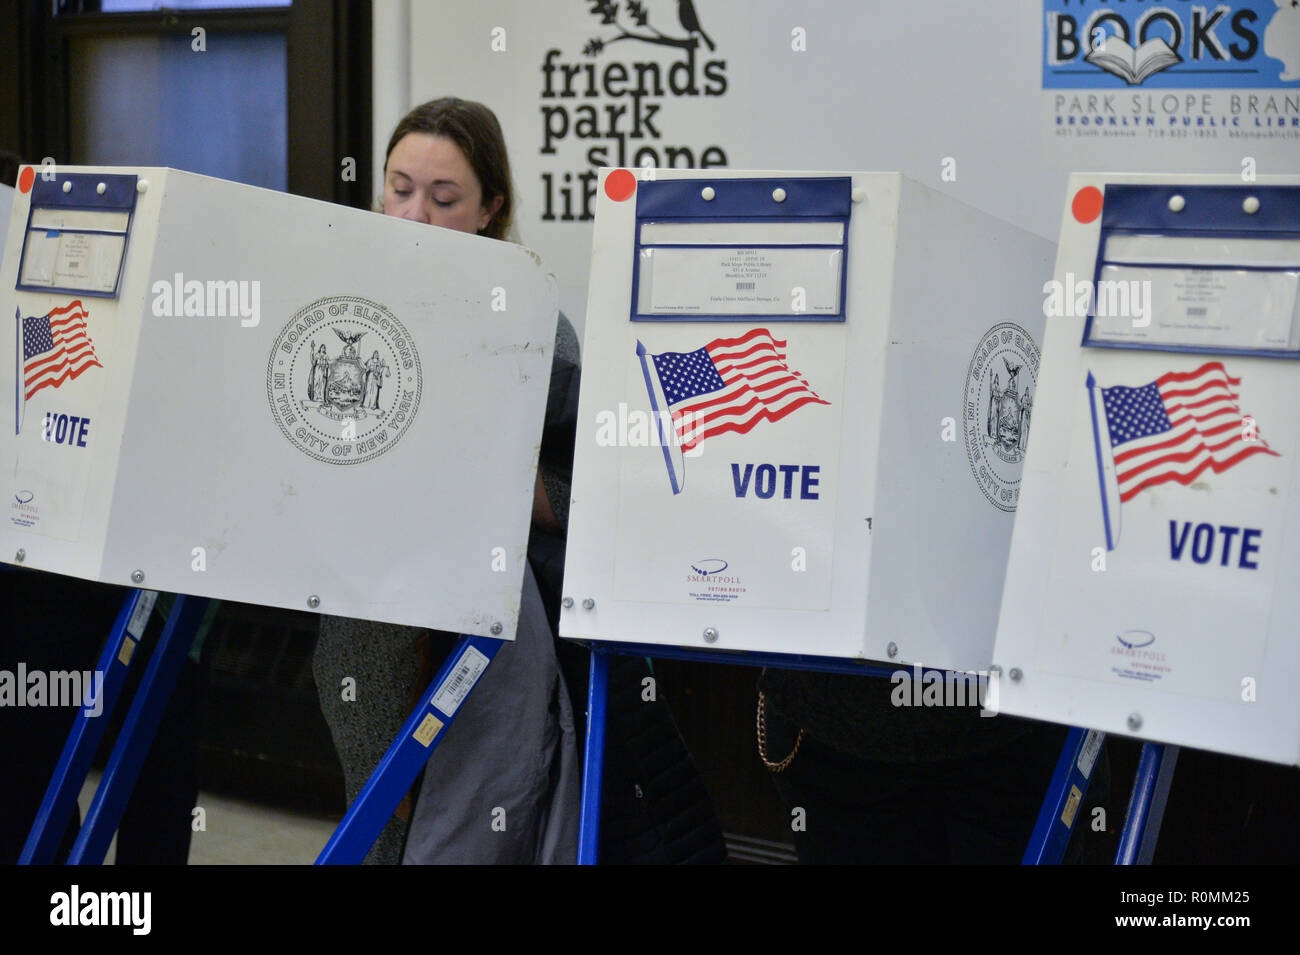 New York, USA. 6th November, 2018. Residents in the Park Slope section of Brooklyn, New York cast their vote during the Midterm Elections on November 6, 2018. Credit: Erik Pendzich/Alamy Live News Stock Photo